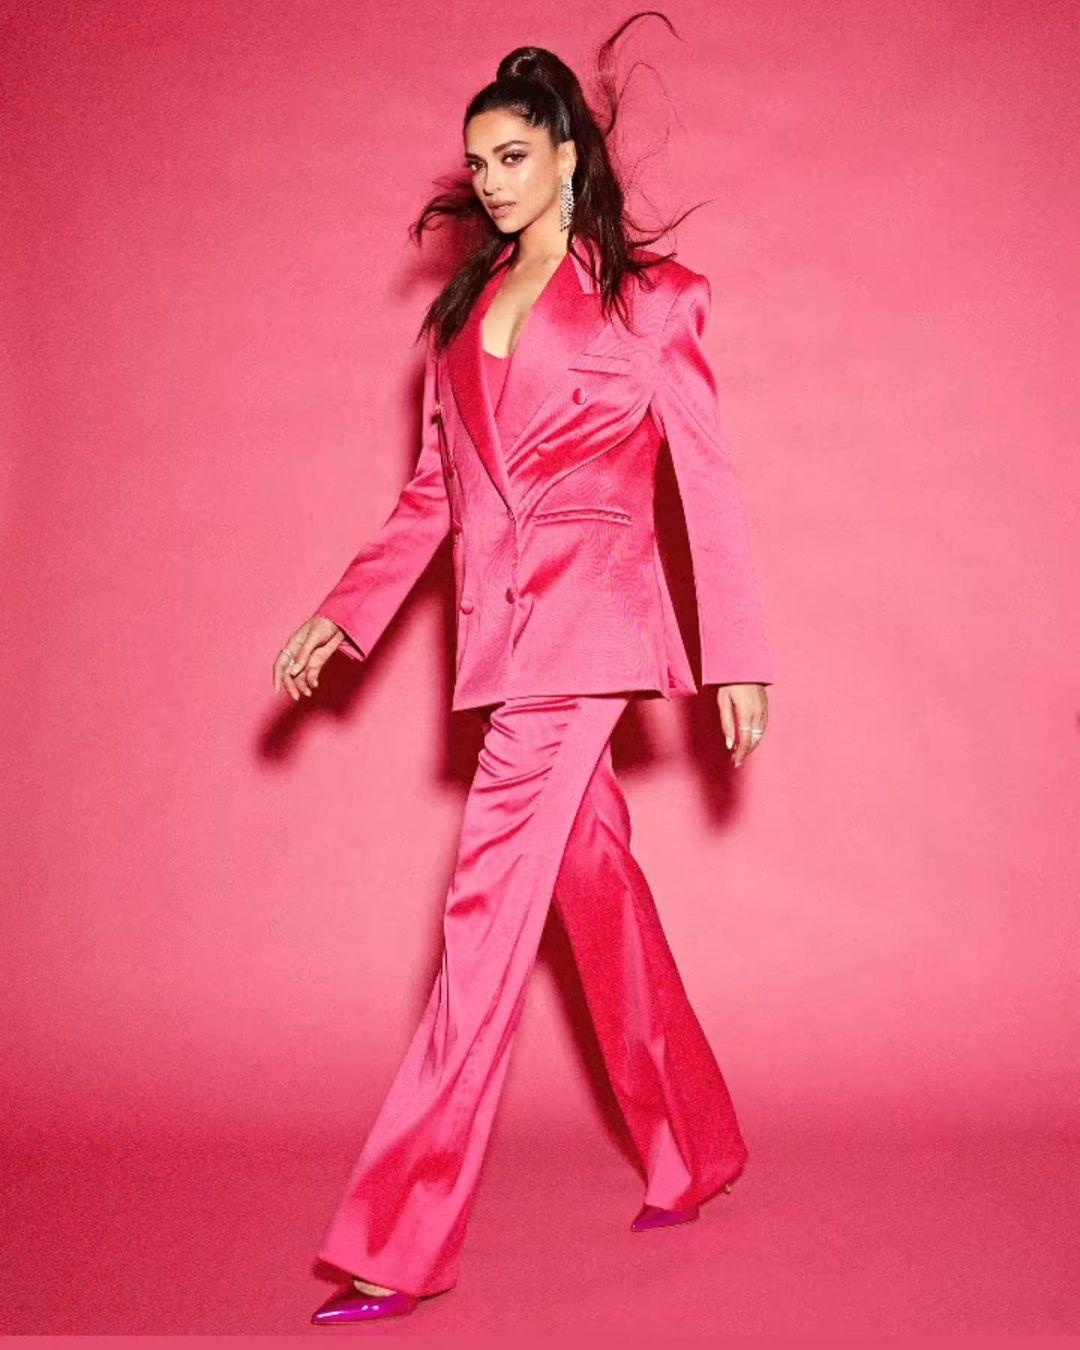 Powerful in Pink! Deepika slays in a sophisticated pantsuit, embodying confidence and style effortlessly